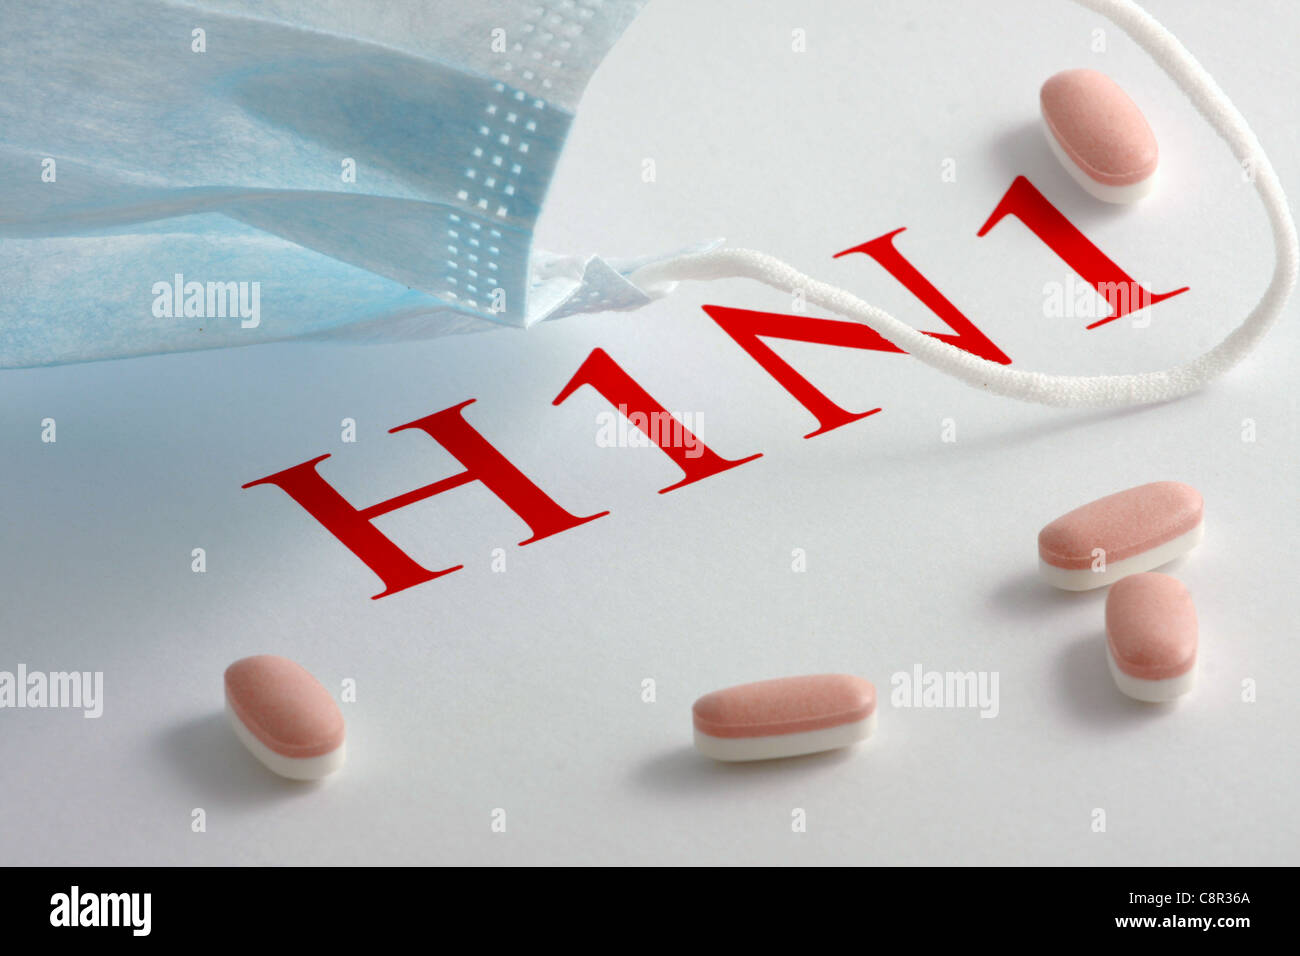 Images of the H1N1 Influenza Virus Stock Photo